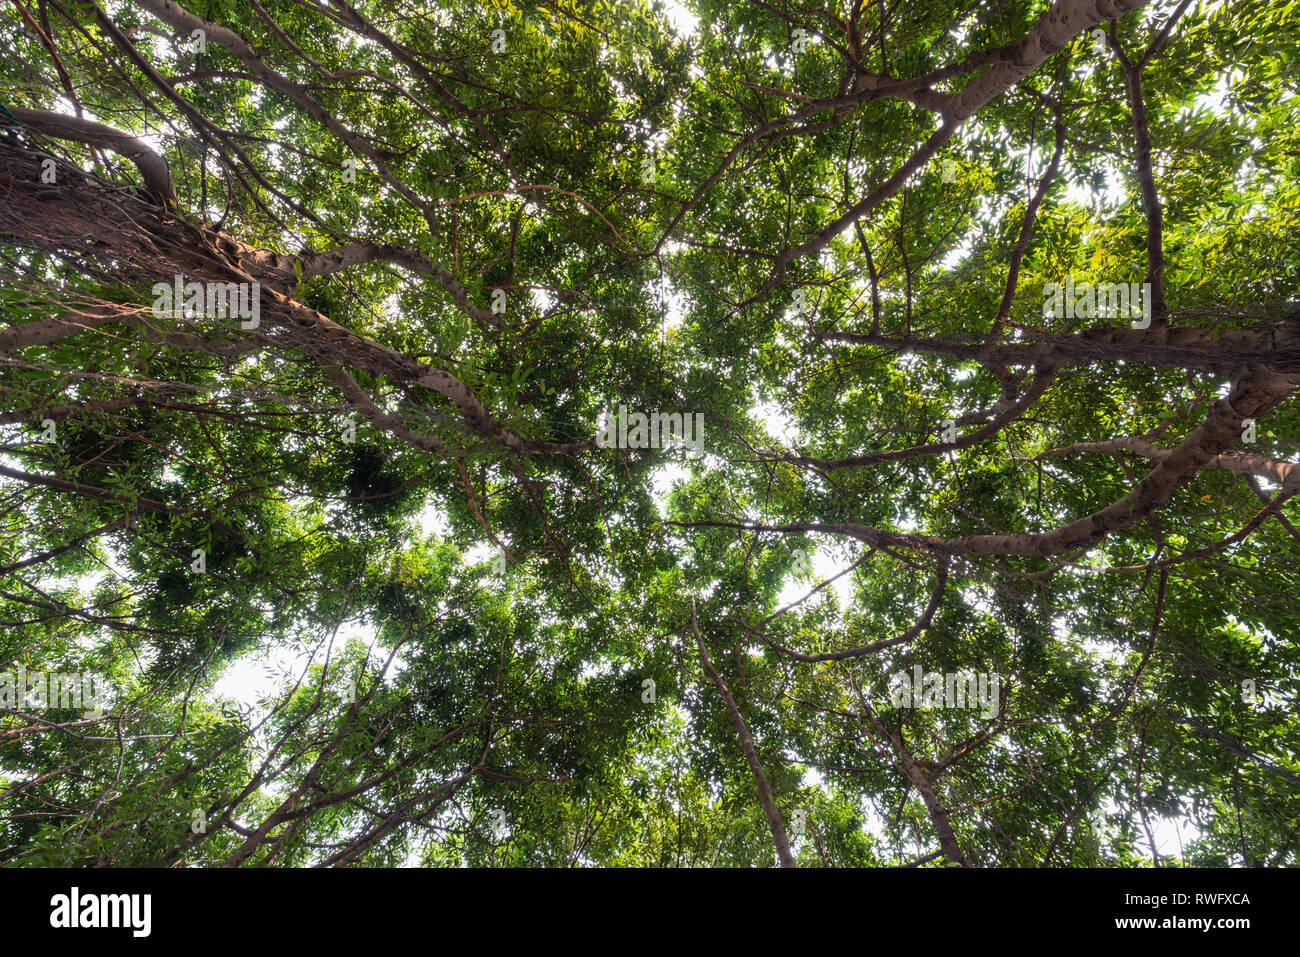 Close-up view of the old and big tree, from down to the treetop with green leaves. Sunlight through the branchwork of forest near beach. Stock Photo